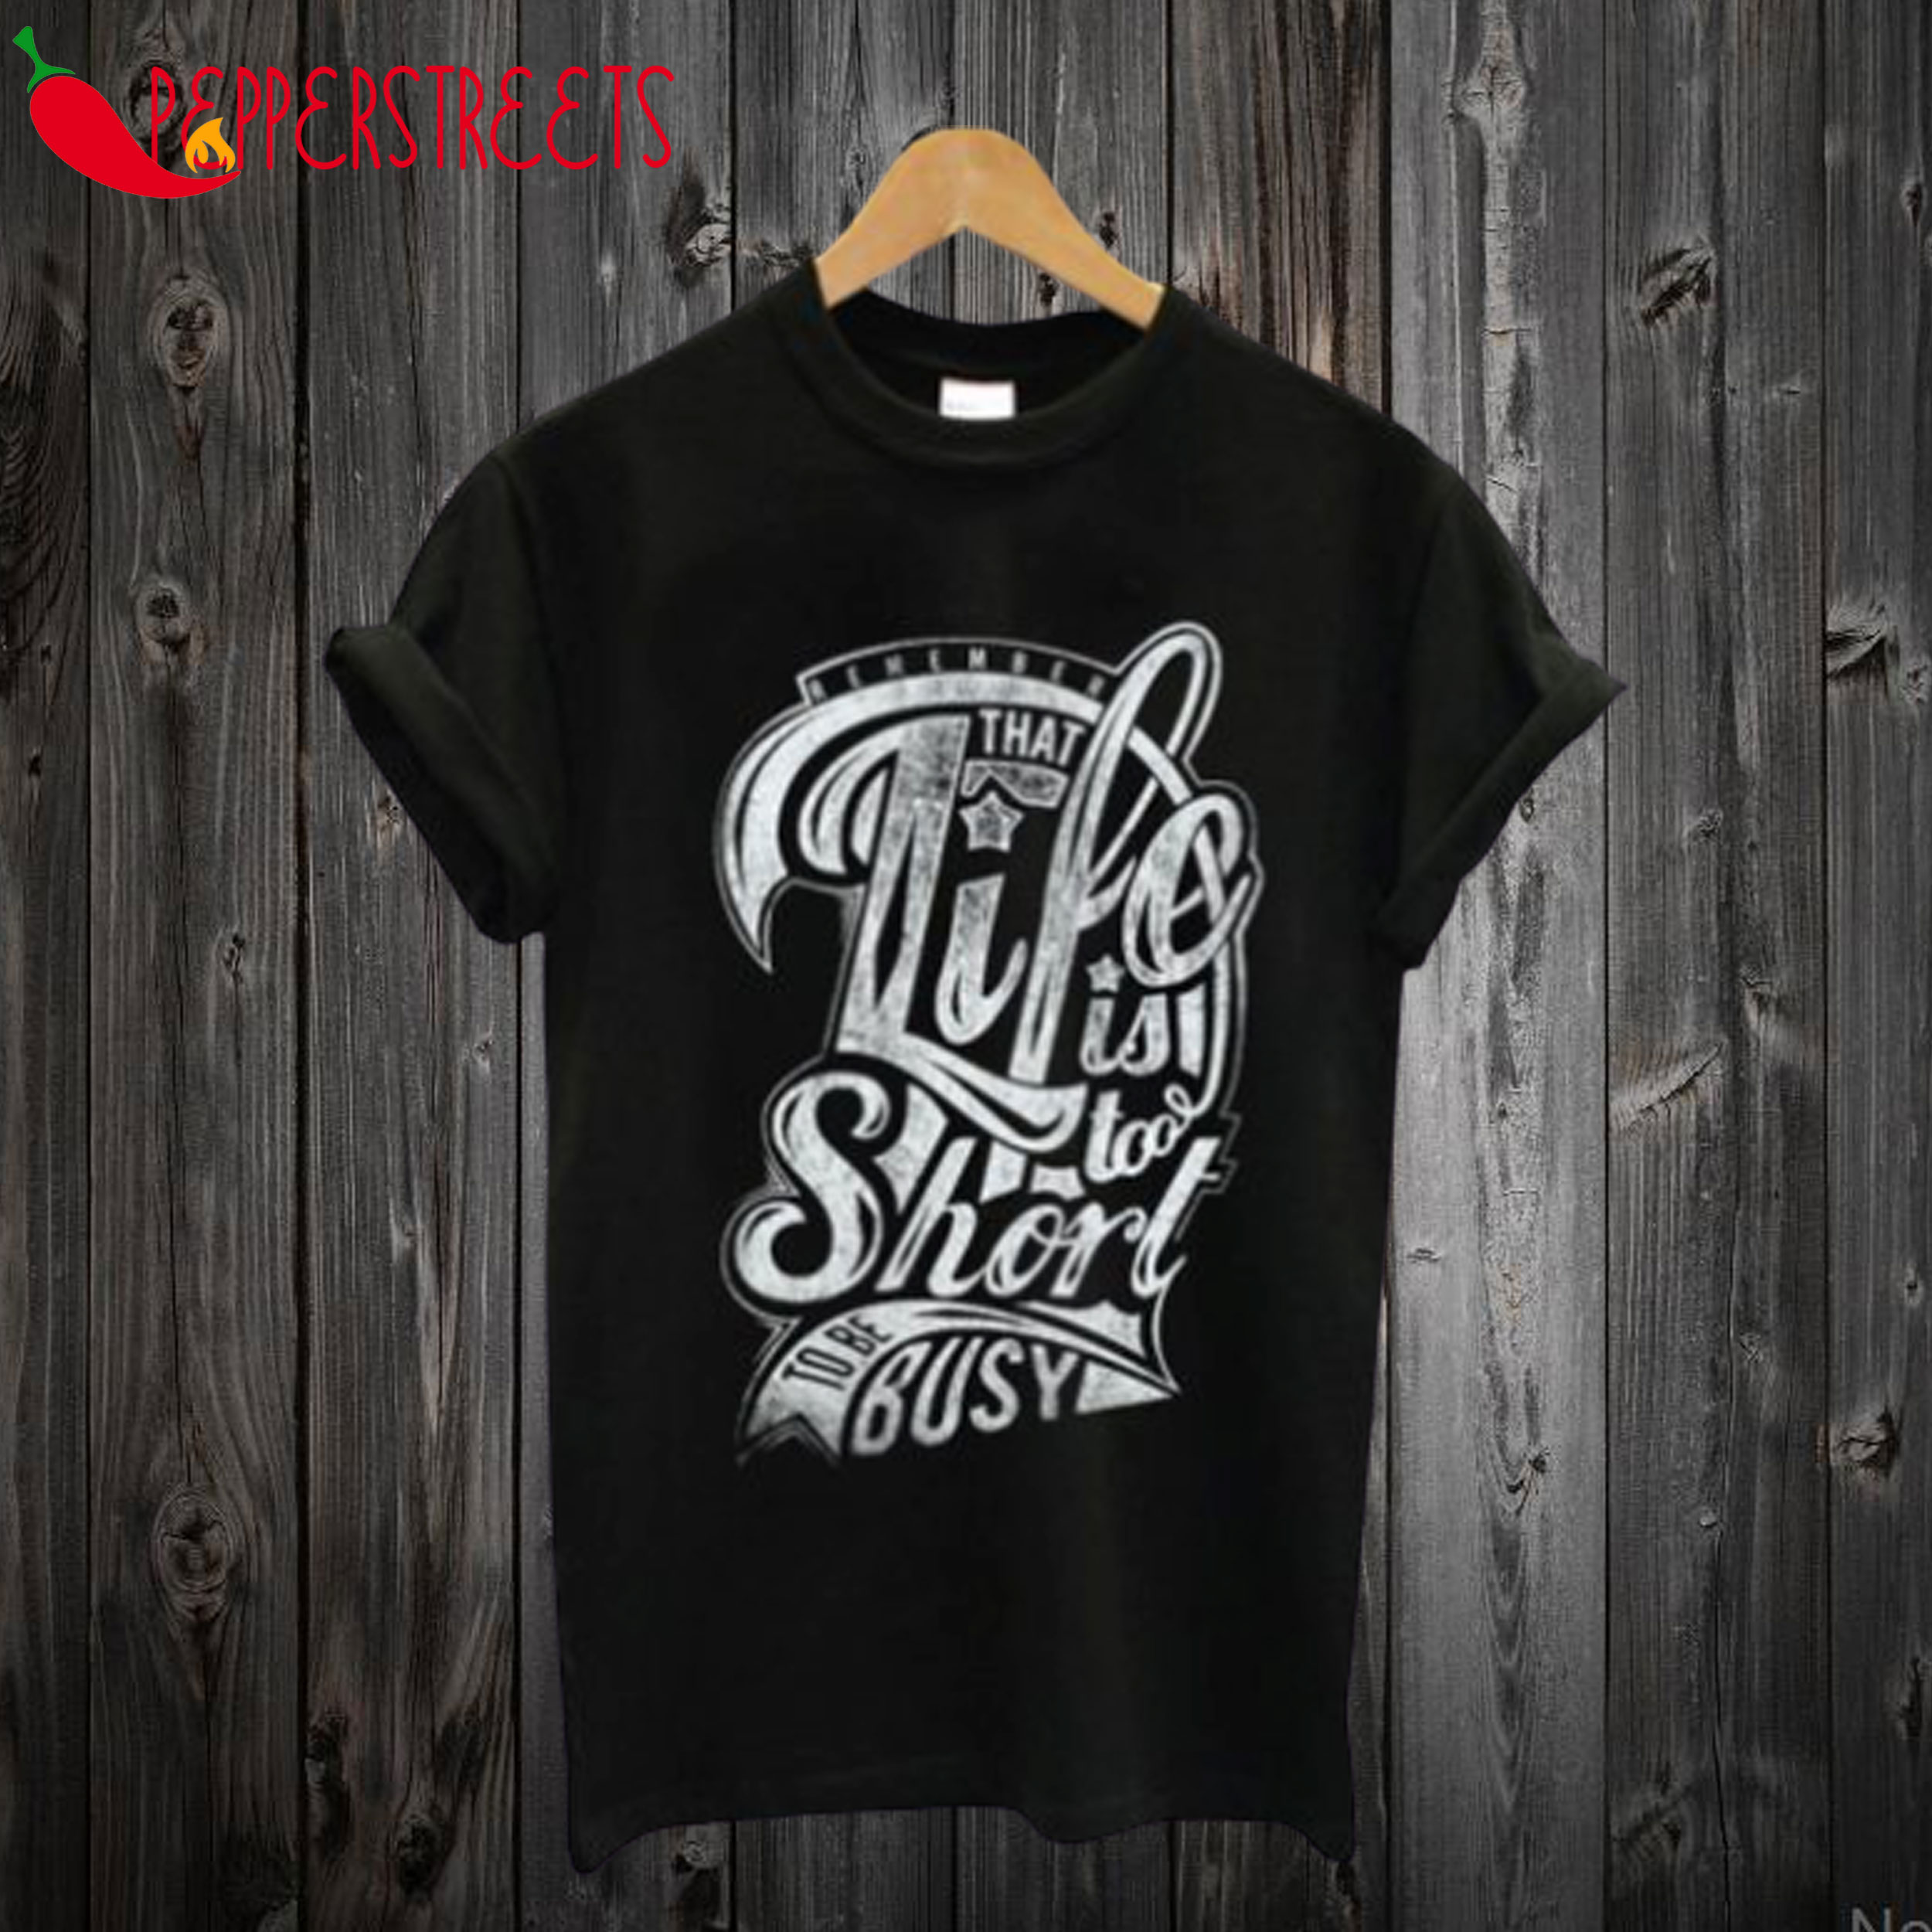 That life is to short to be busy T-Shirt